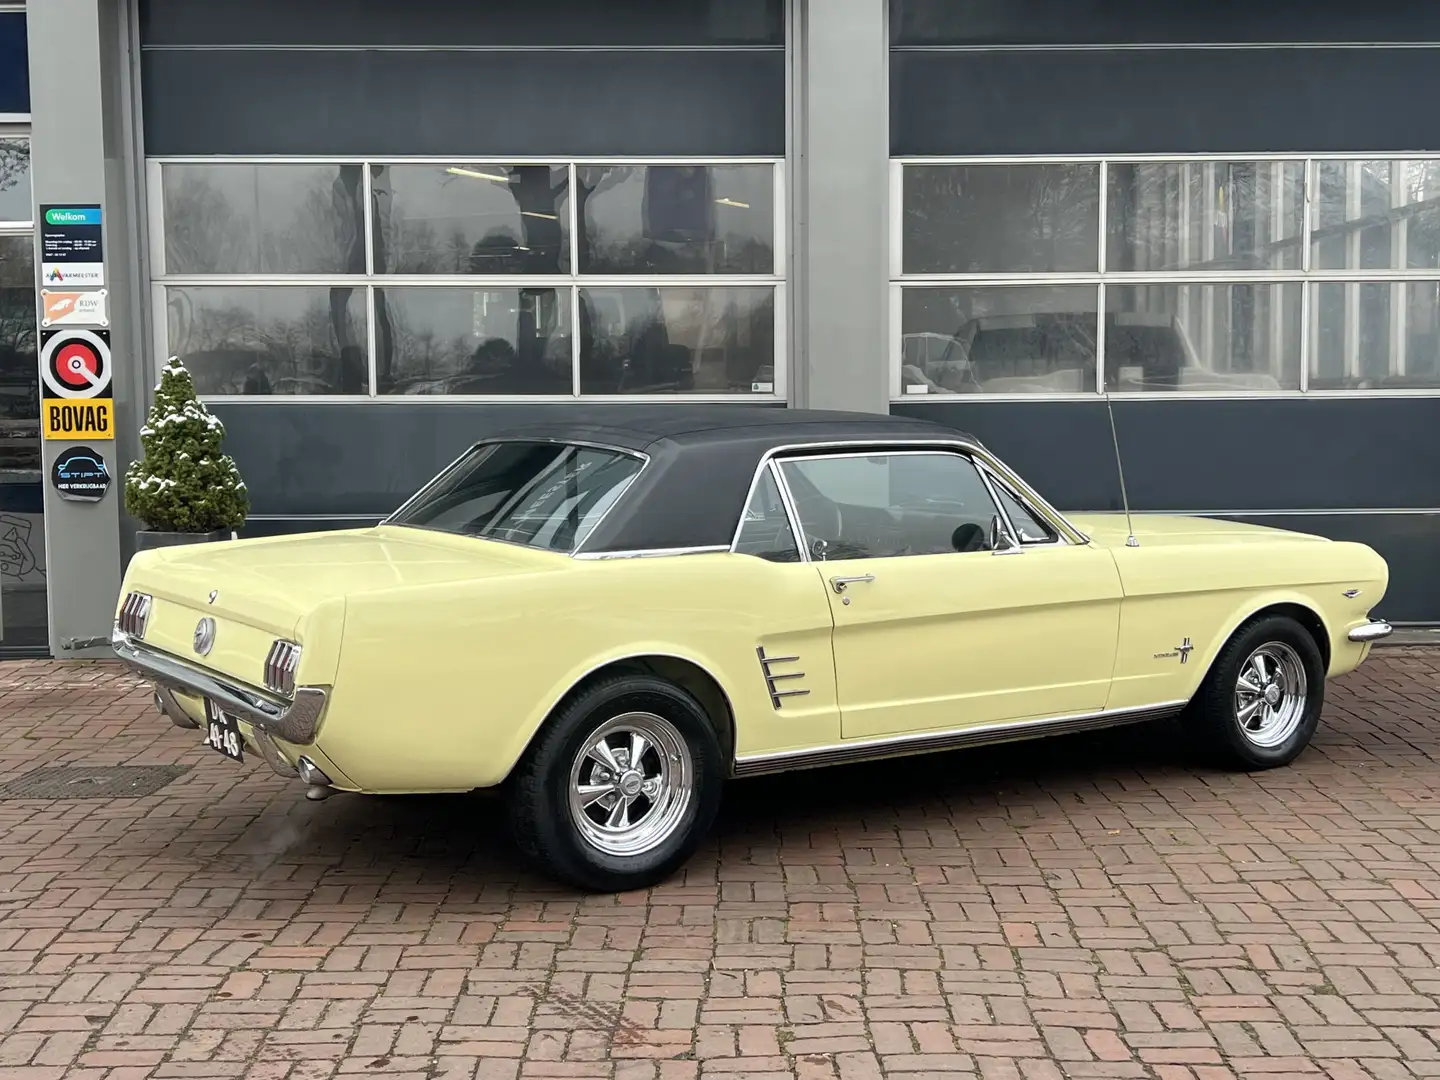 Ford Mustang USA 4.6 V8 LPG GT 289 Bj 1966 TOP STAAT 301PK !! m Beżowy - 2